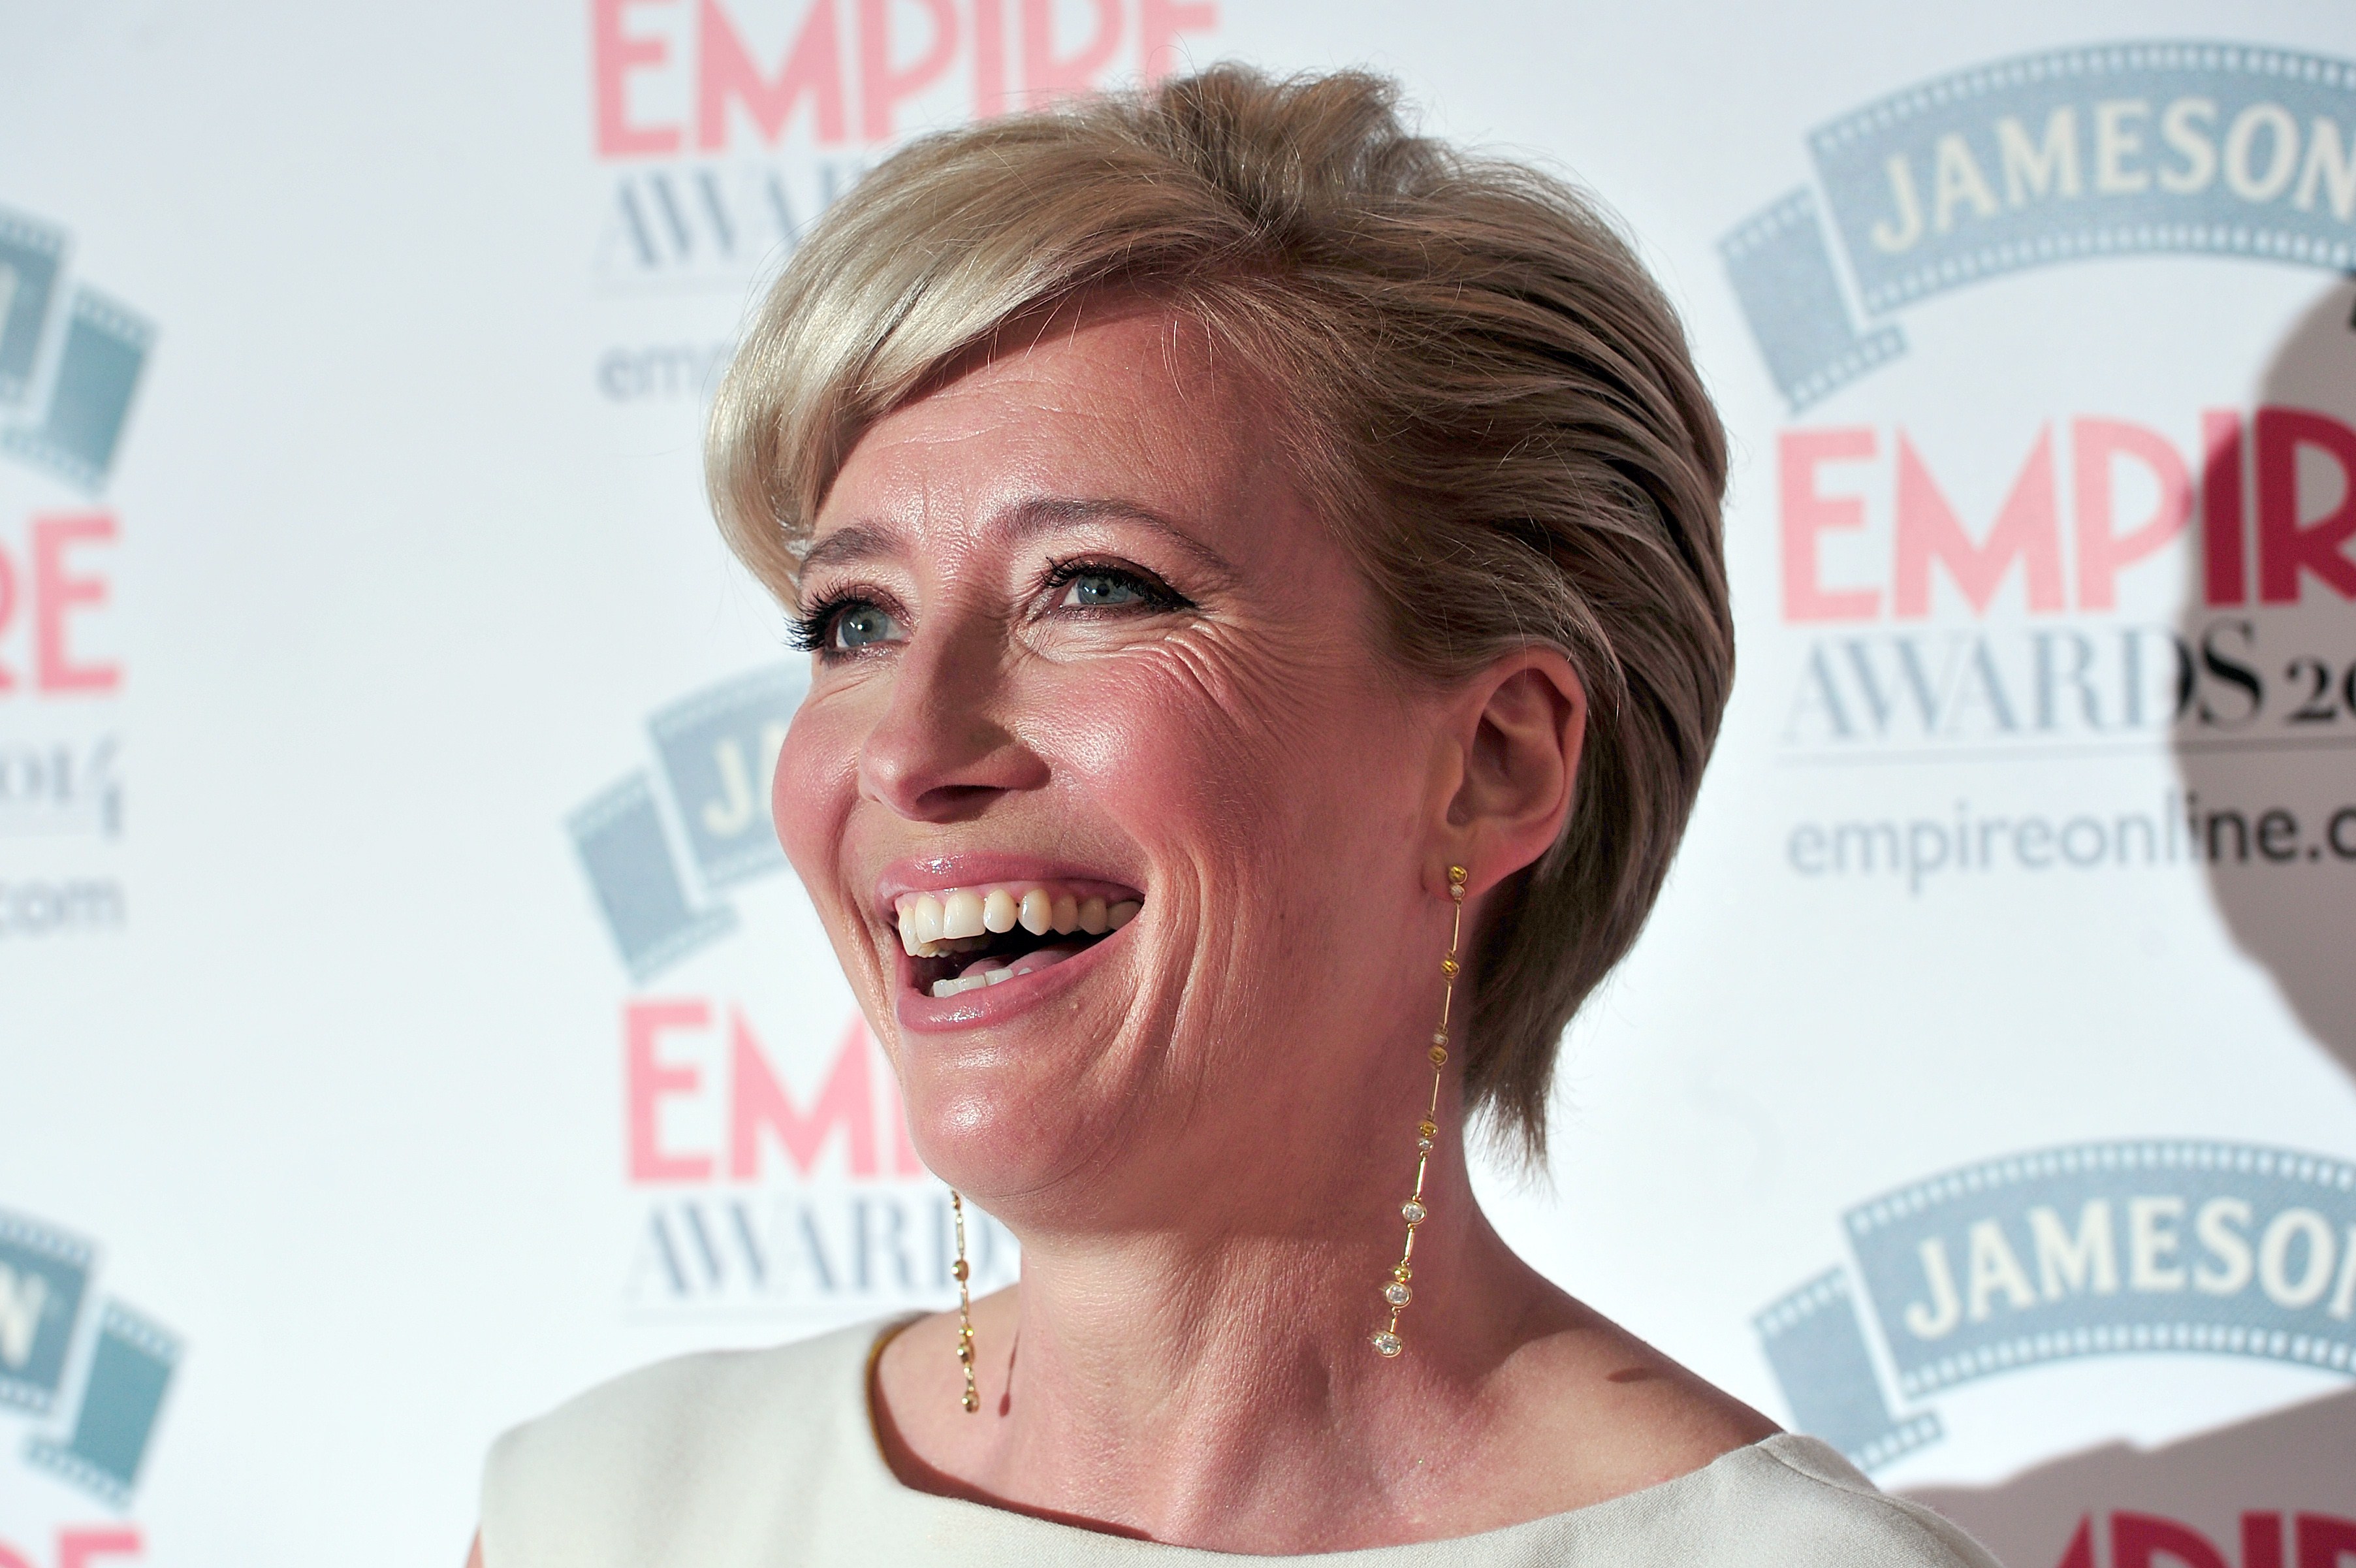 British actress Emma Thompson poses for pictures as she arrives for the 2014 Empire Awards in central London on March 30, 2014. (Carl Court—AFP/Getty Images)